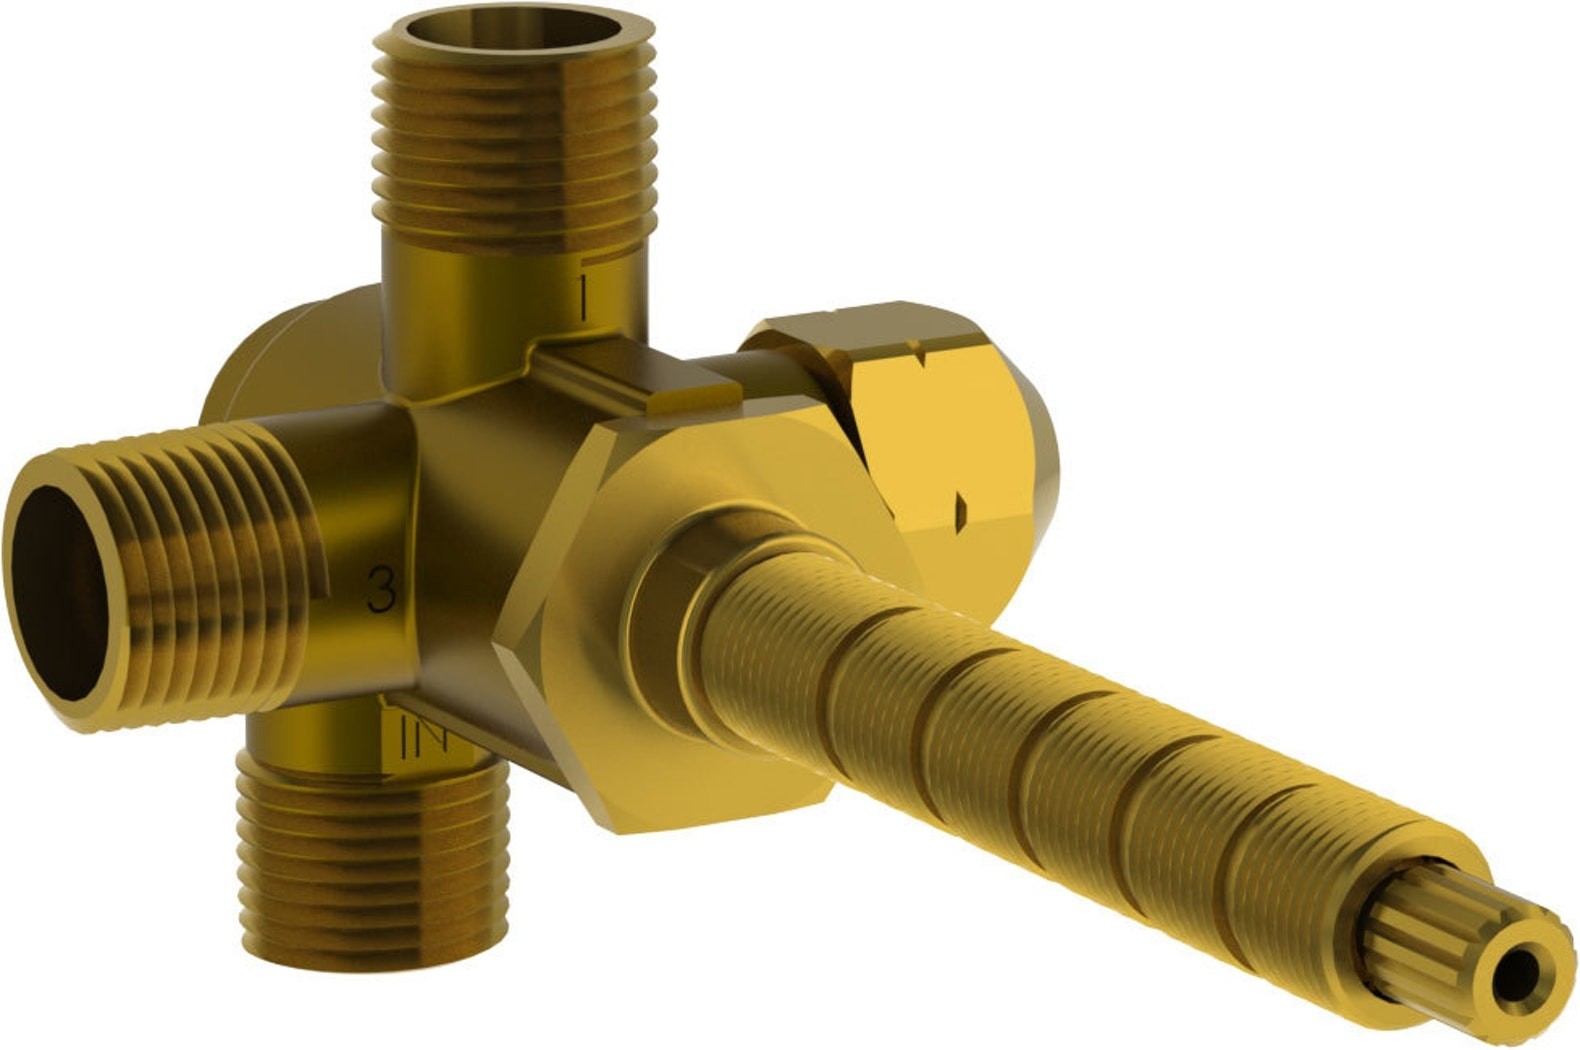 WATERMARK SS-WD2 1/2 INCH TWO WAY DIVERTER VALVE